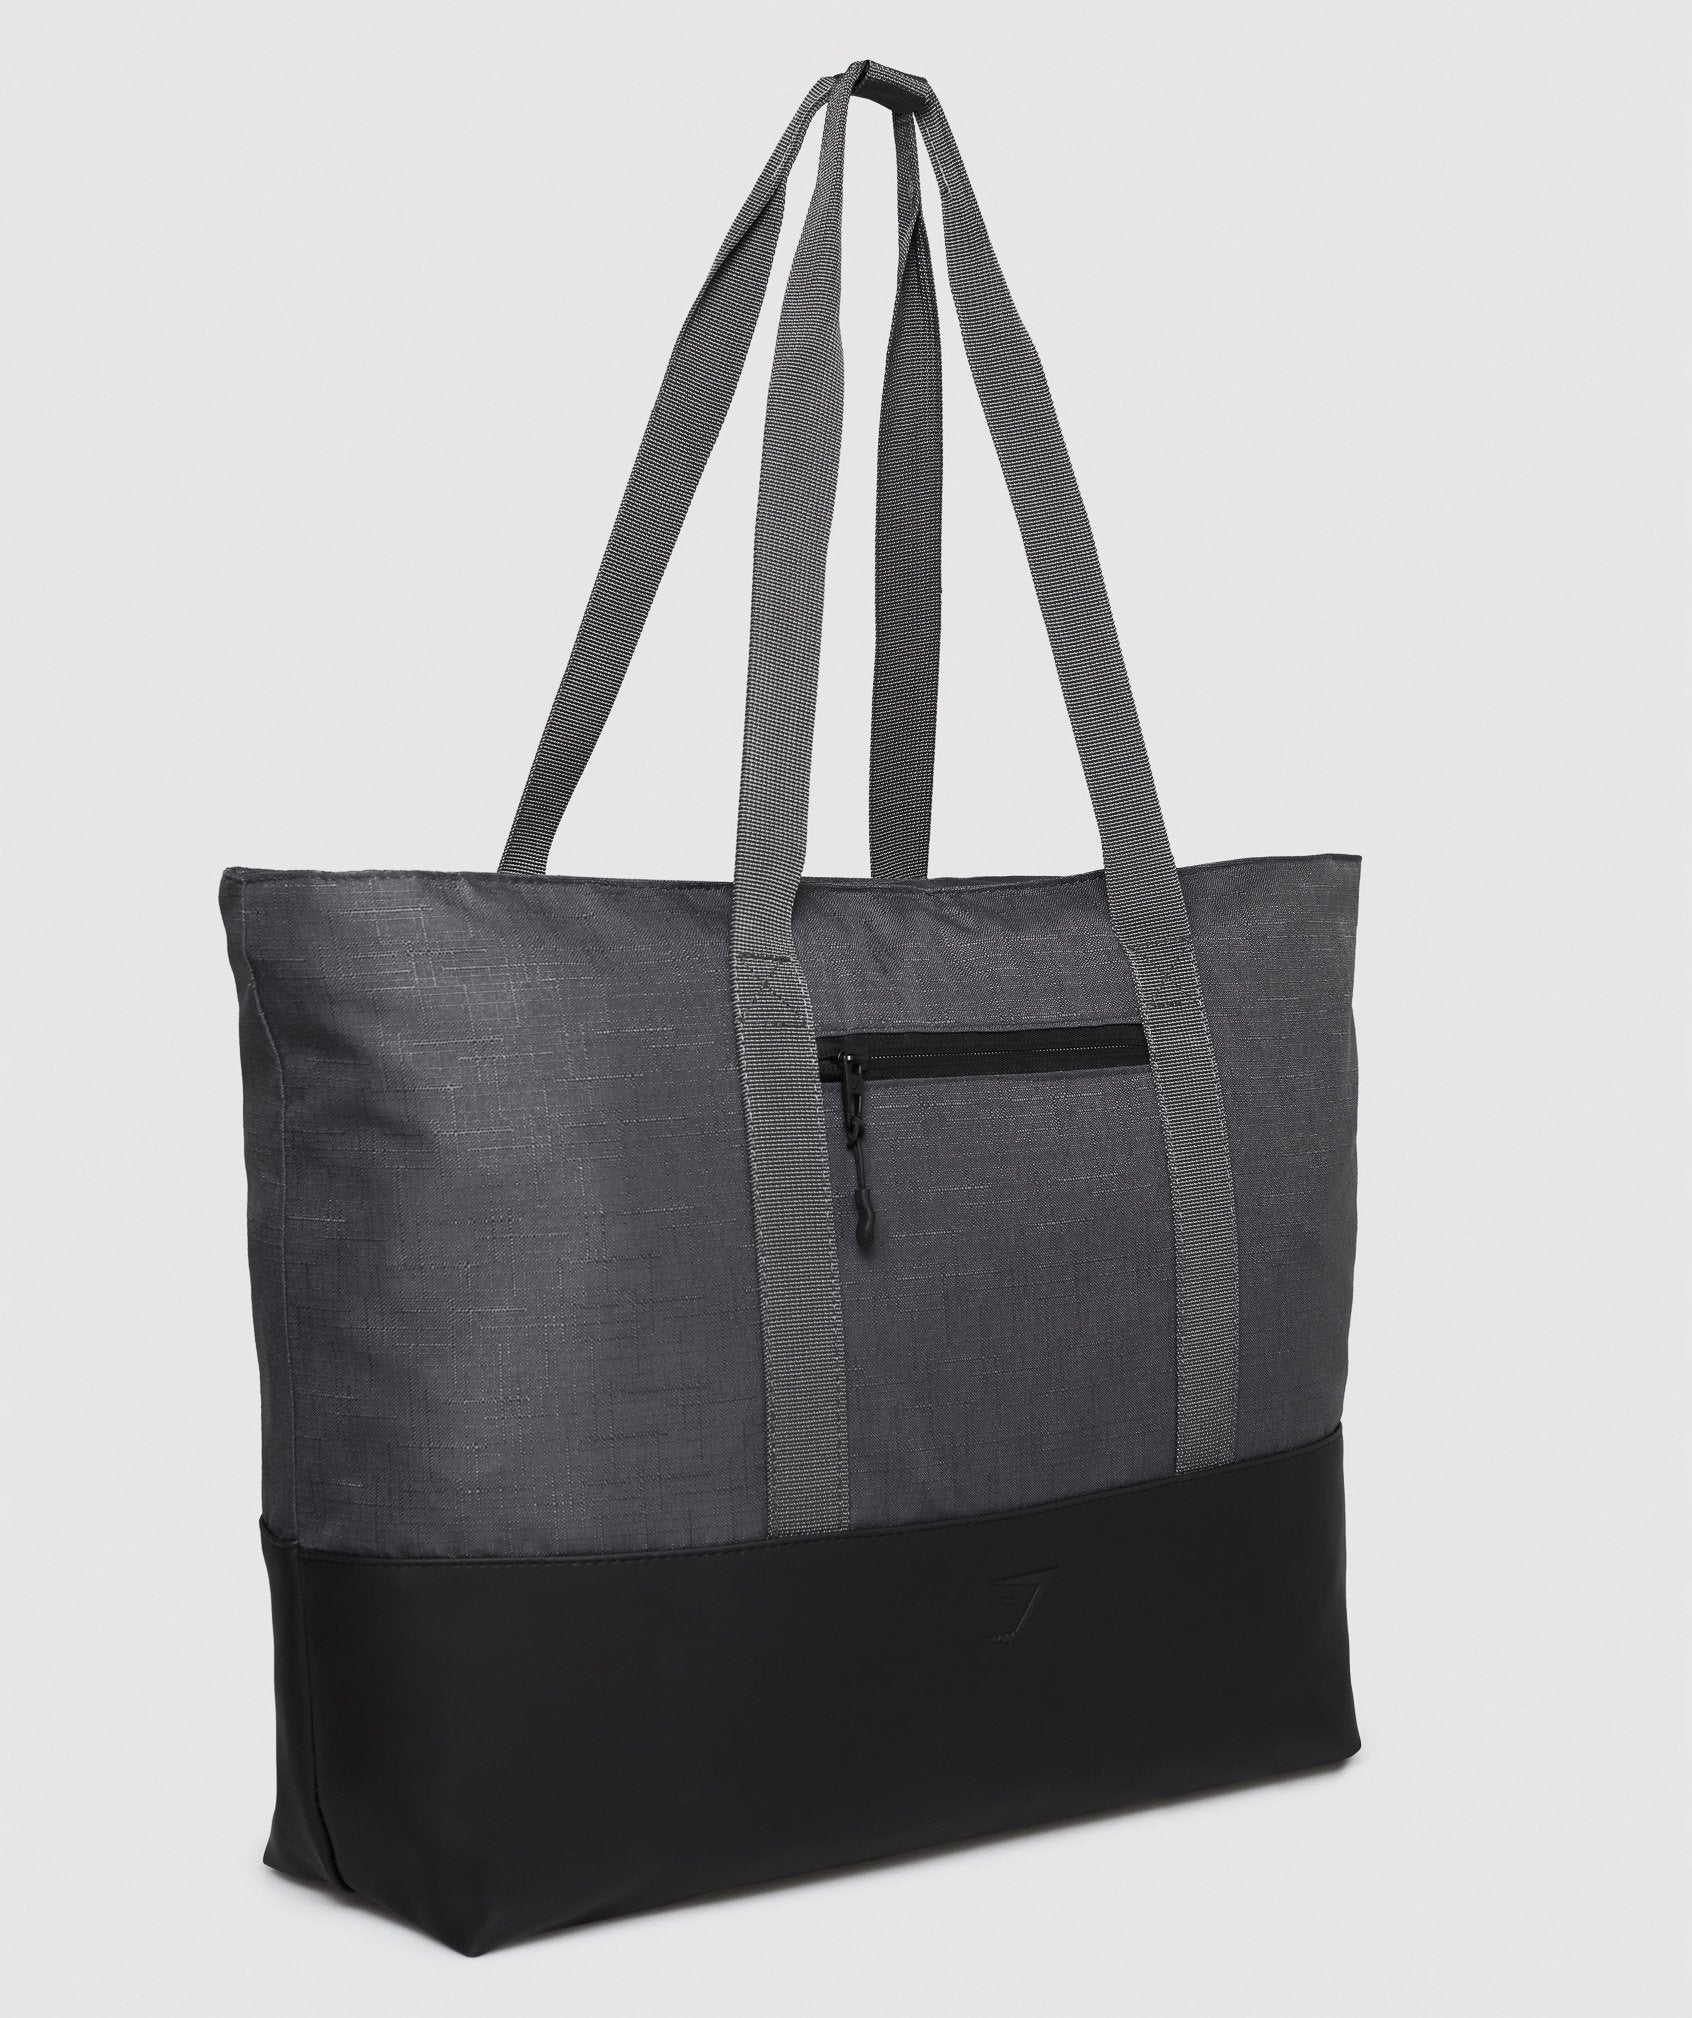 Tote Bag in Charcoal - view 3